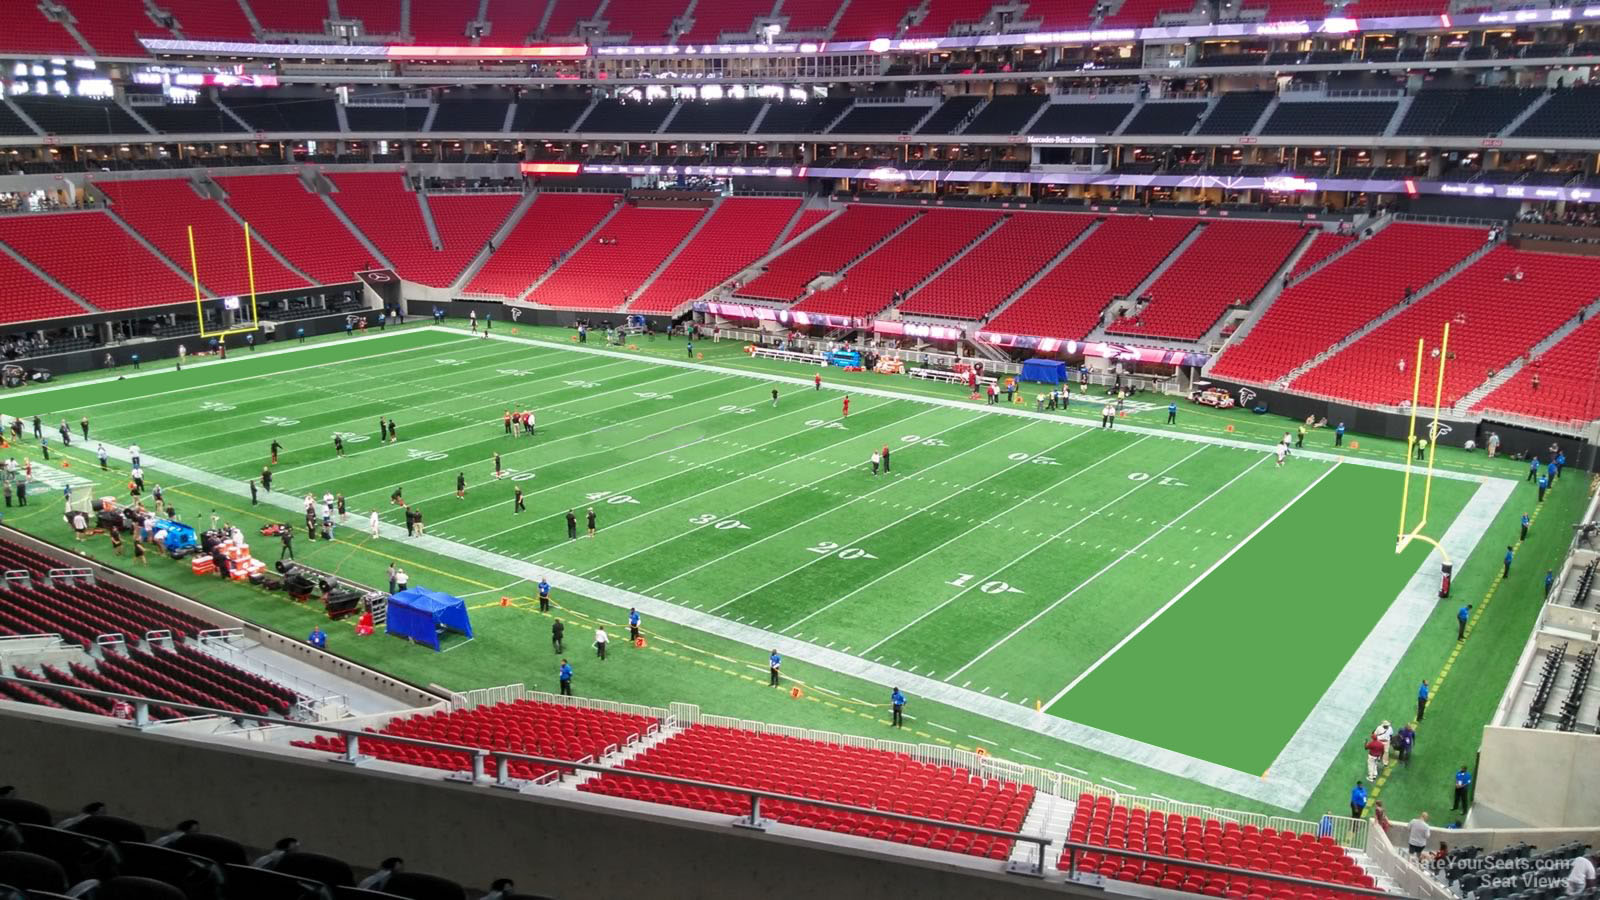 section 205, row 6 seat view  for football - mercedes-benz stadium